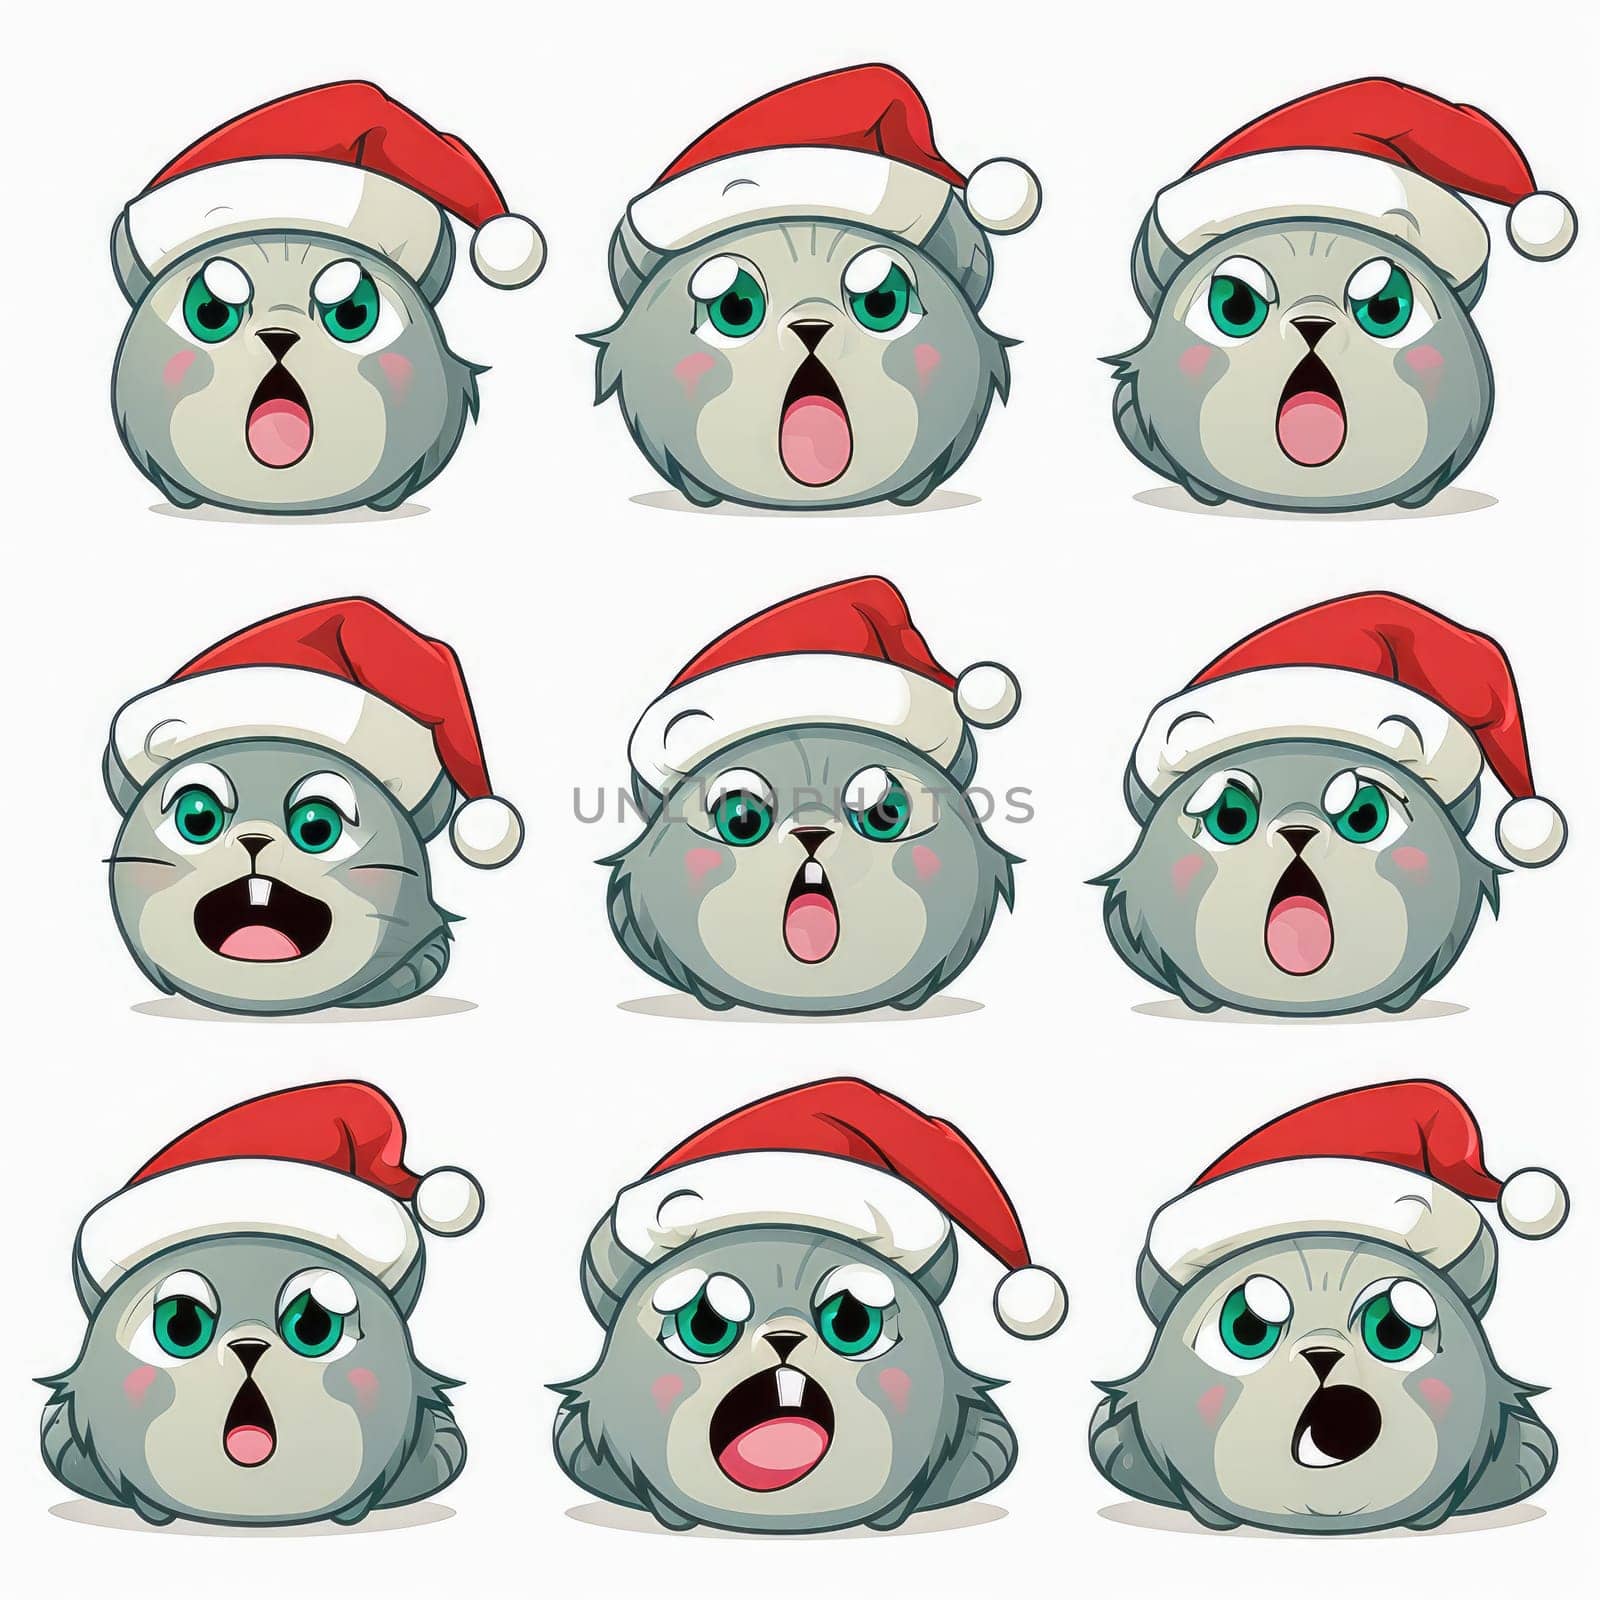 New Year emoji of funny cat. Cartoon style, New Year, Christmas. by Yurich32